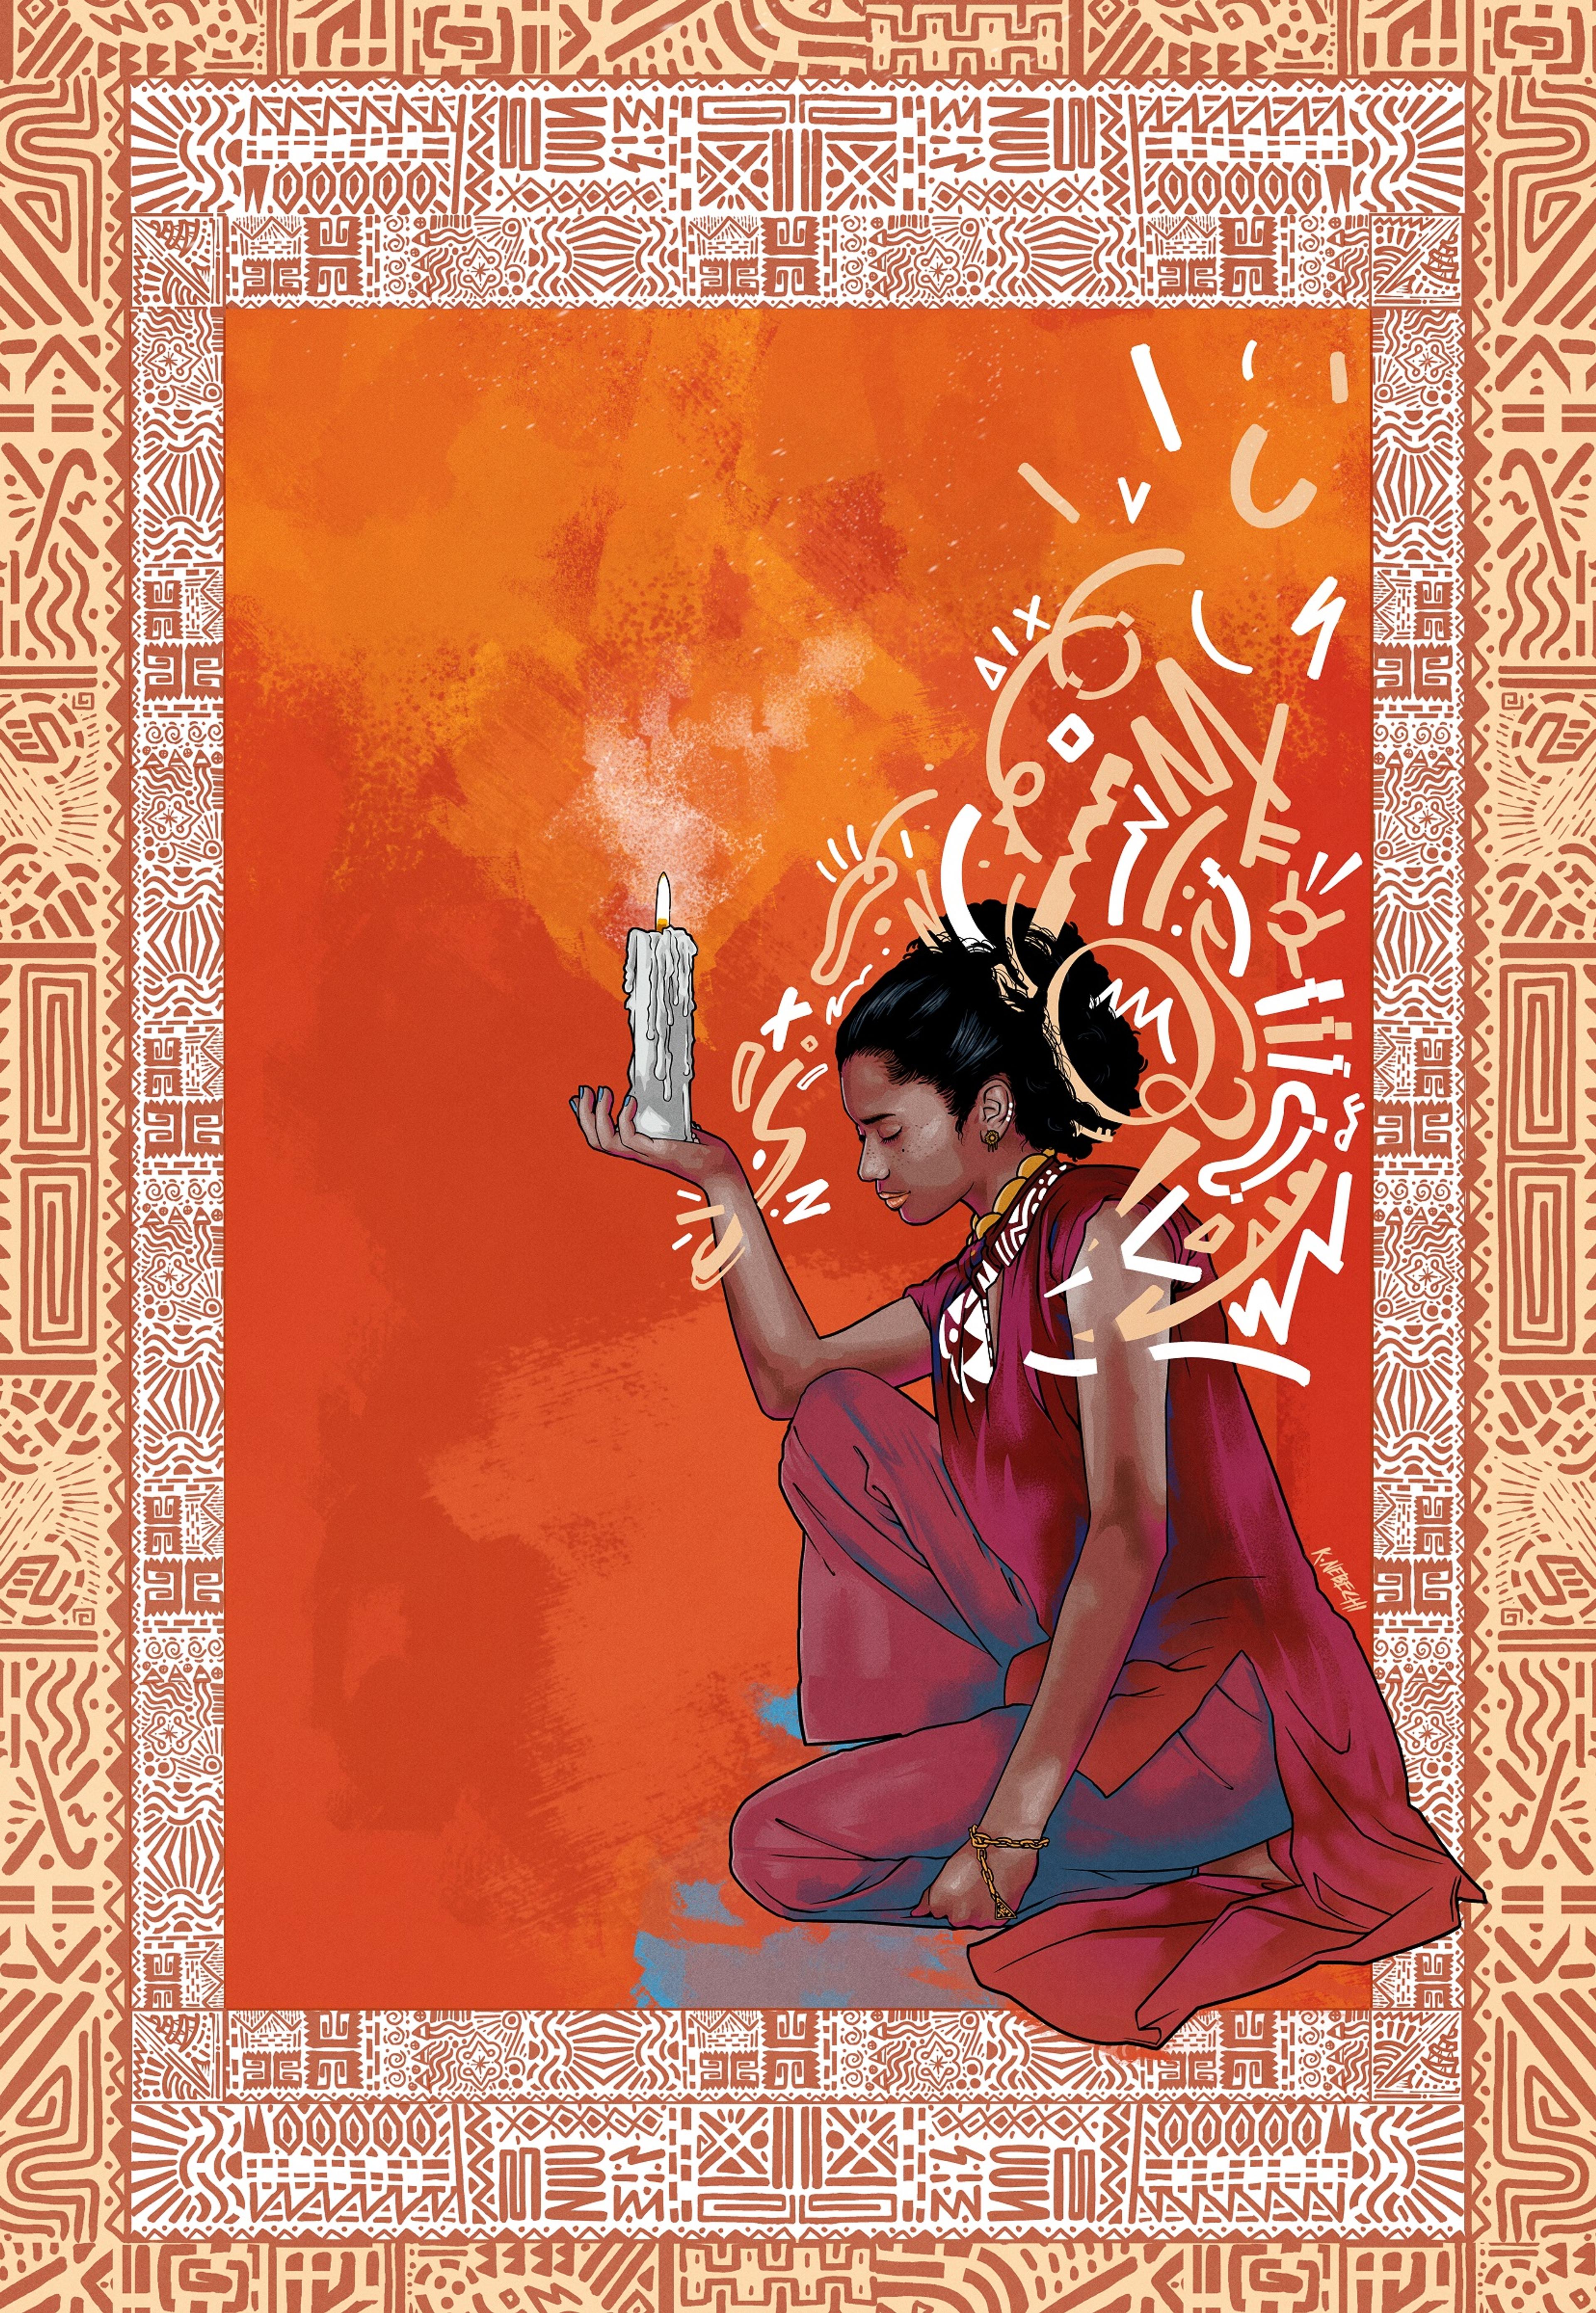 Illustration of a person holding up a candle against an orange background with a decorative border